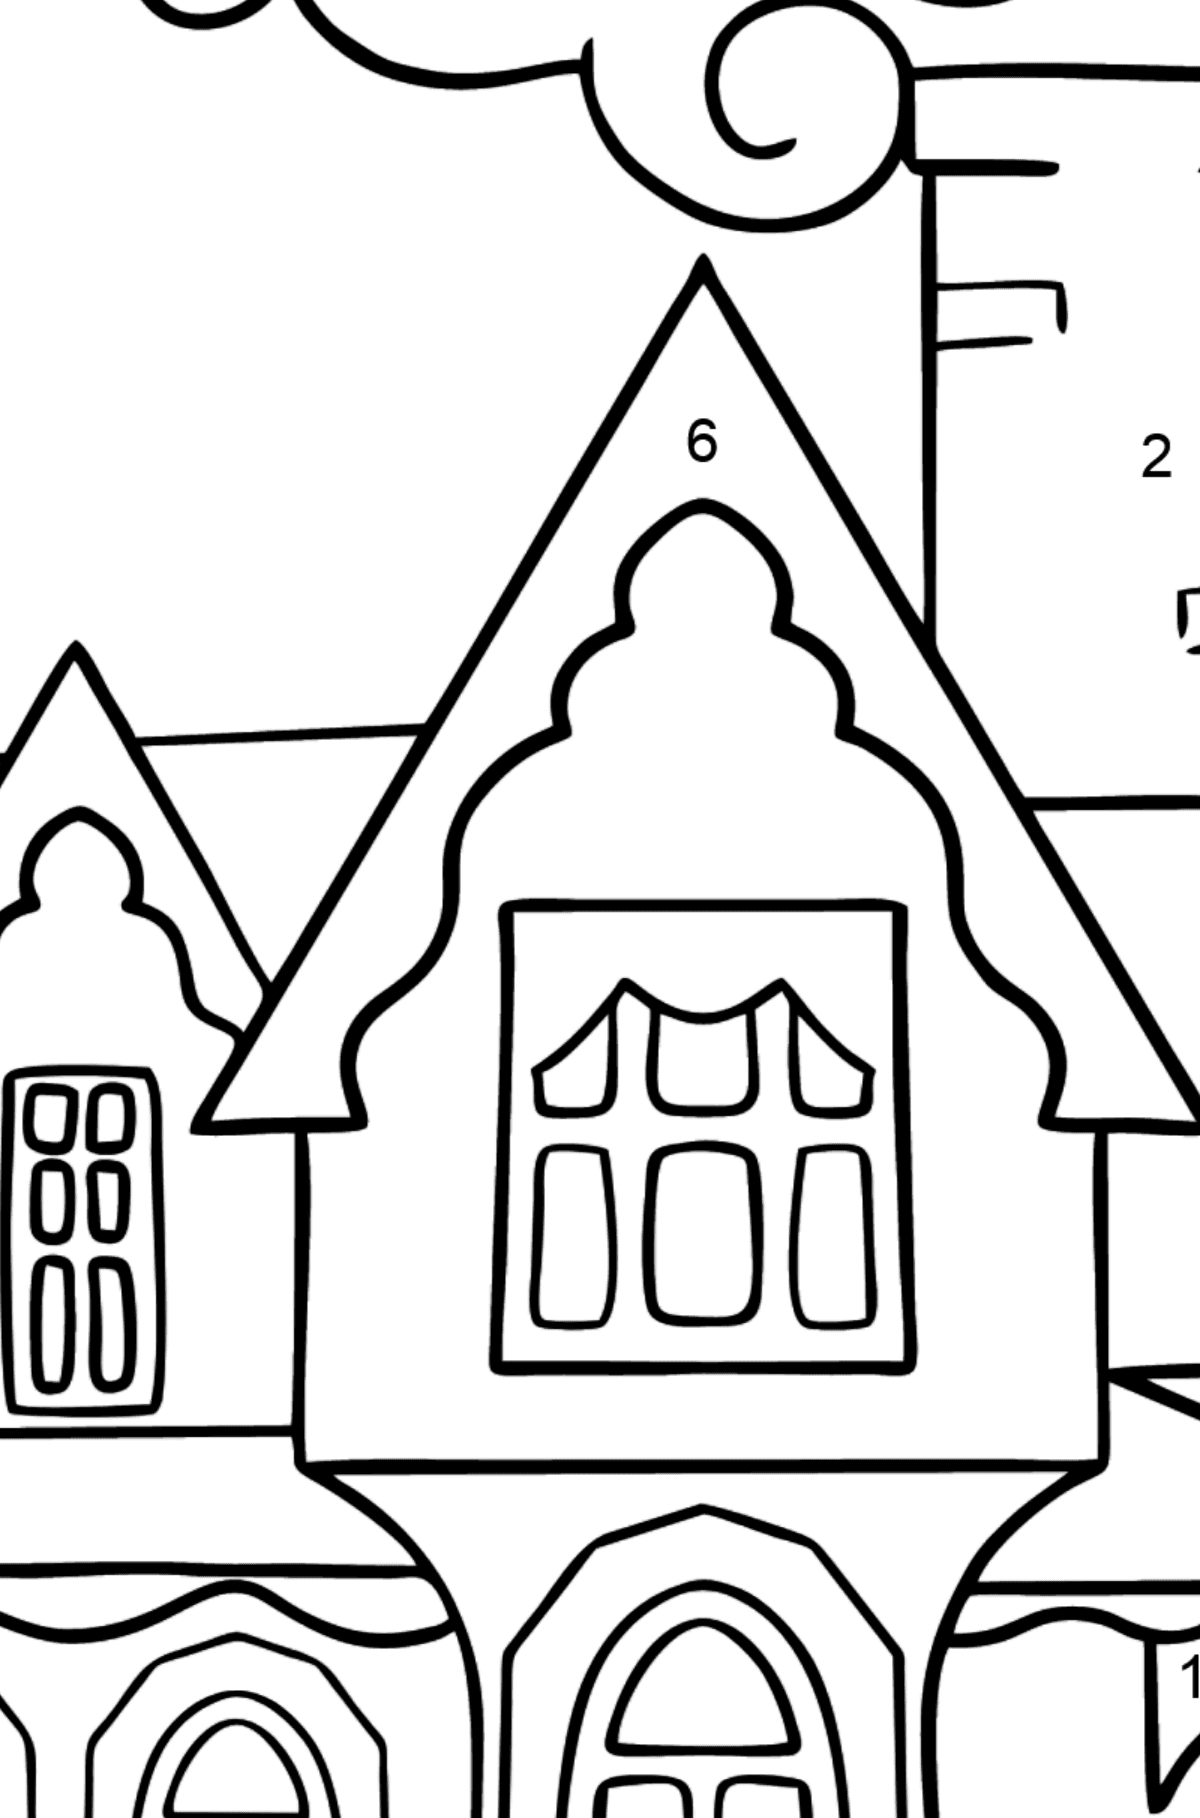 Simple Coloring Page - A Miraculous House - Coloring by Numbers for Kids